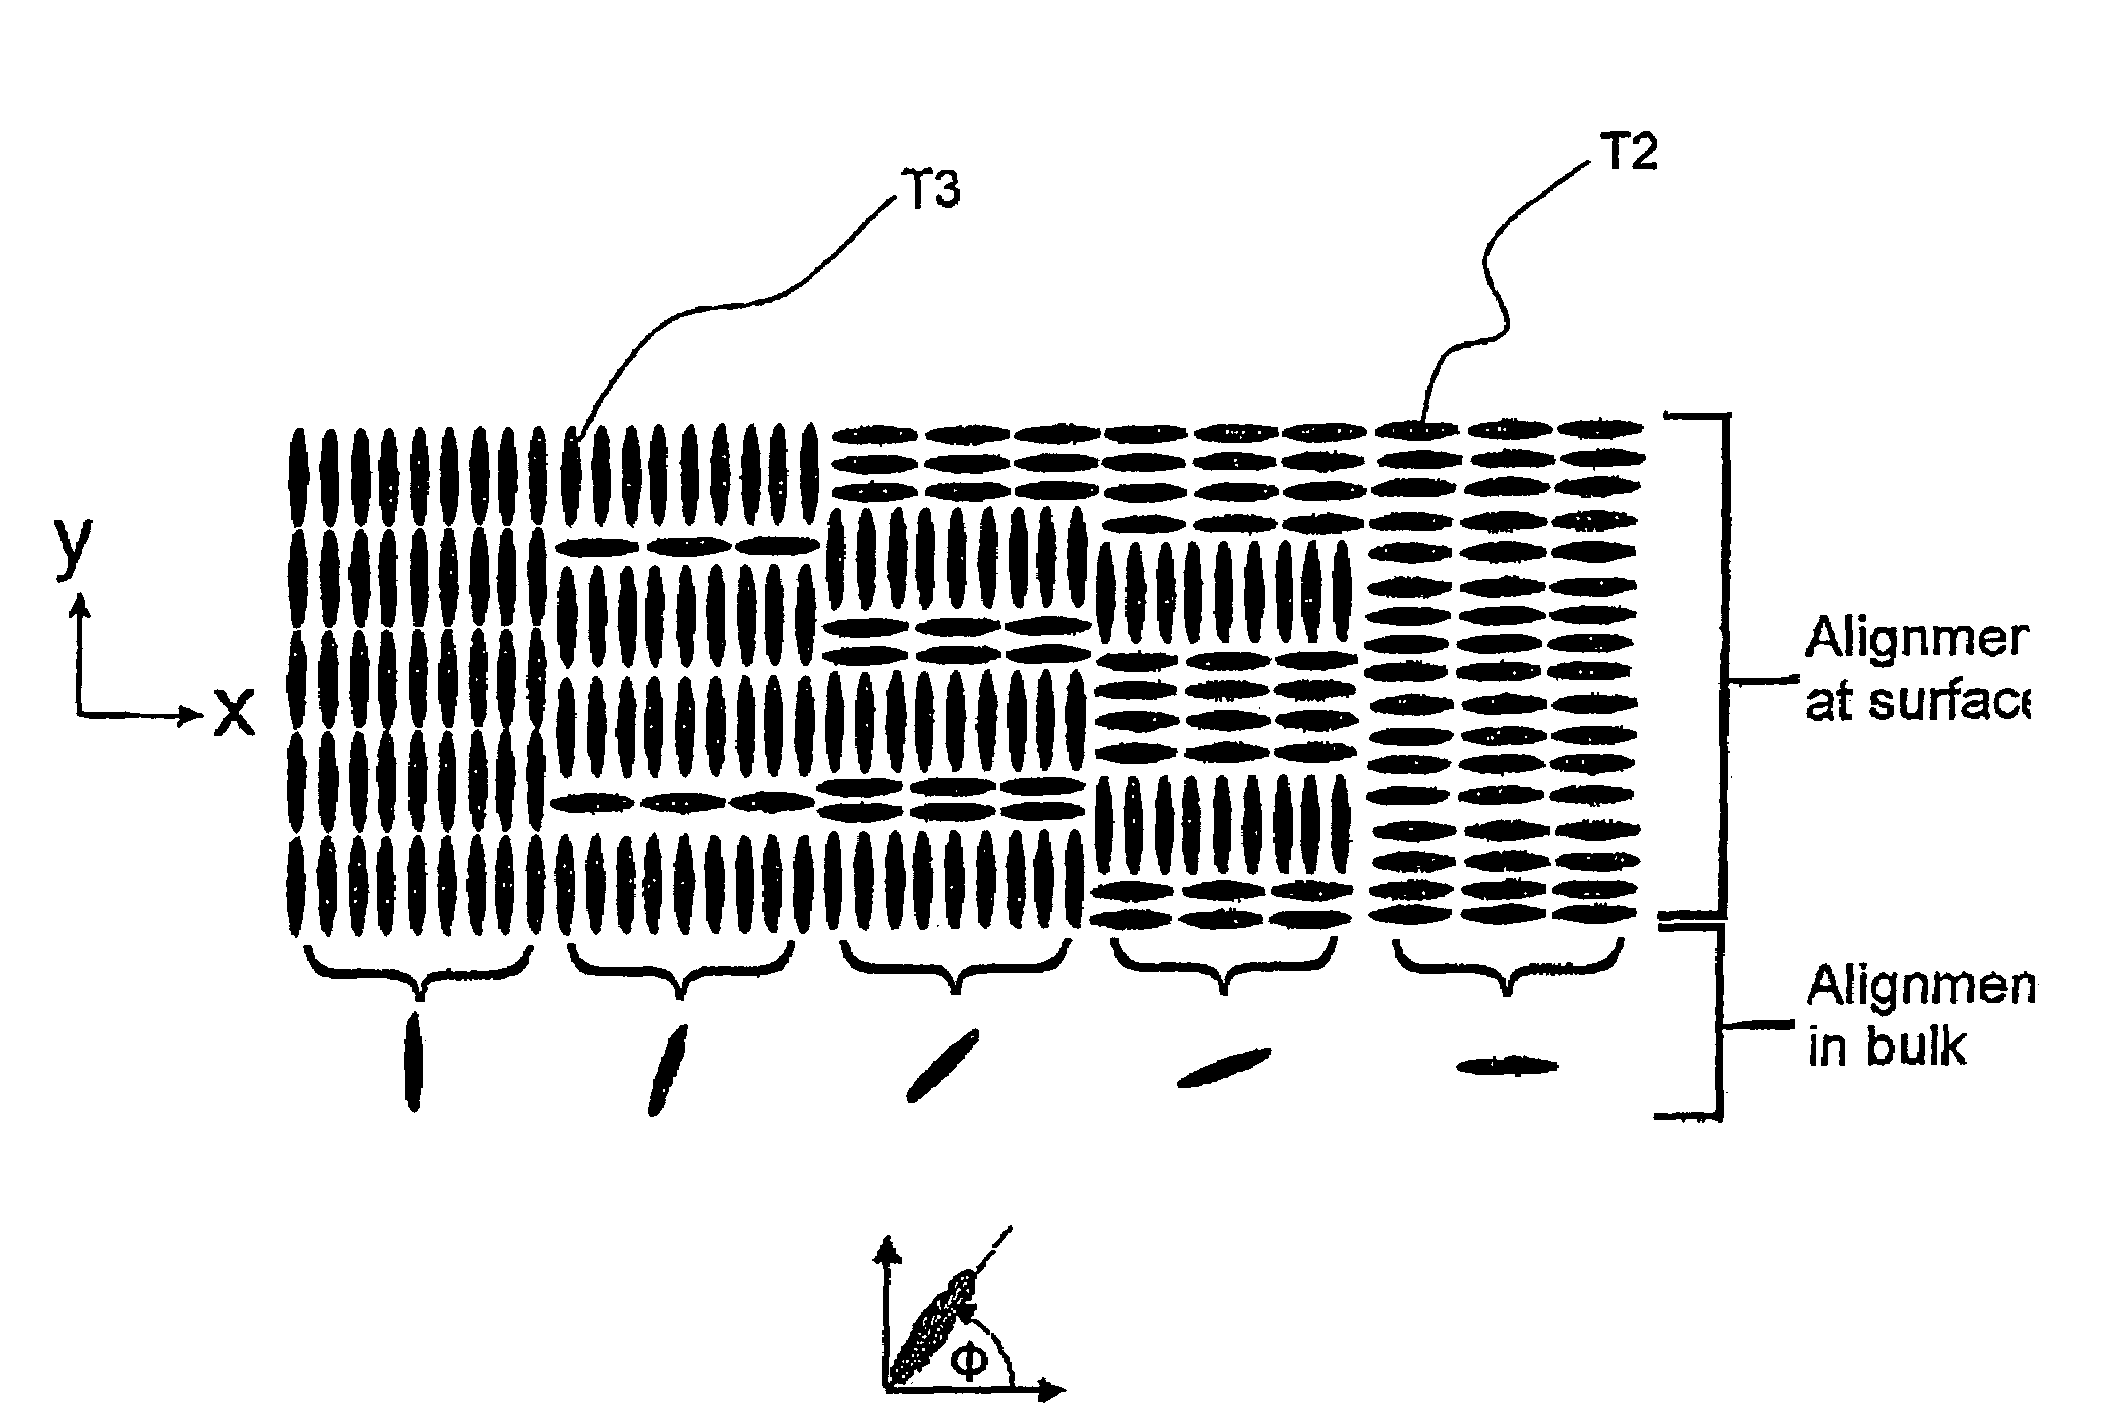 Control of liquid crystal alignment in an optical device